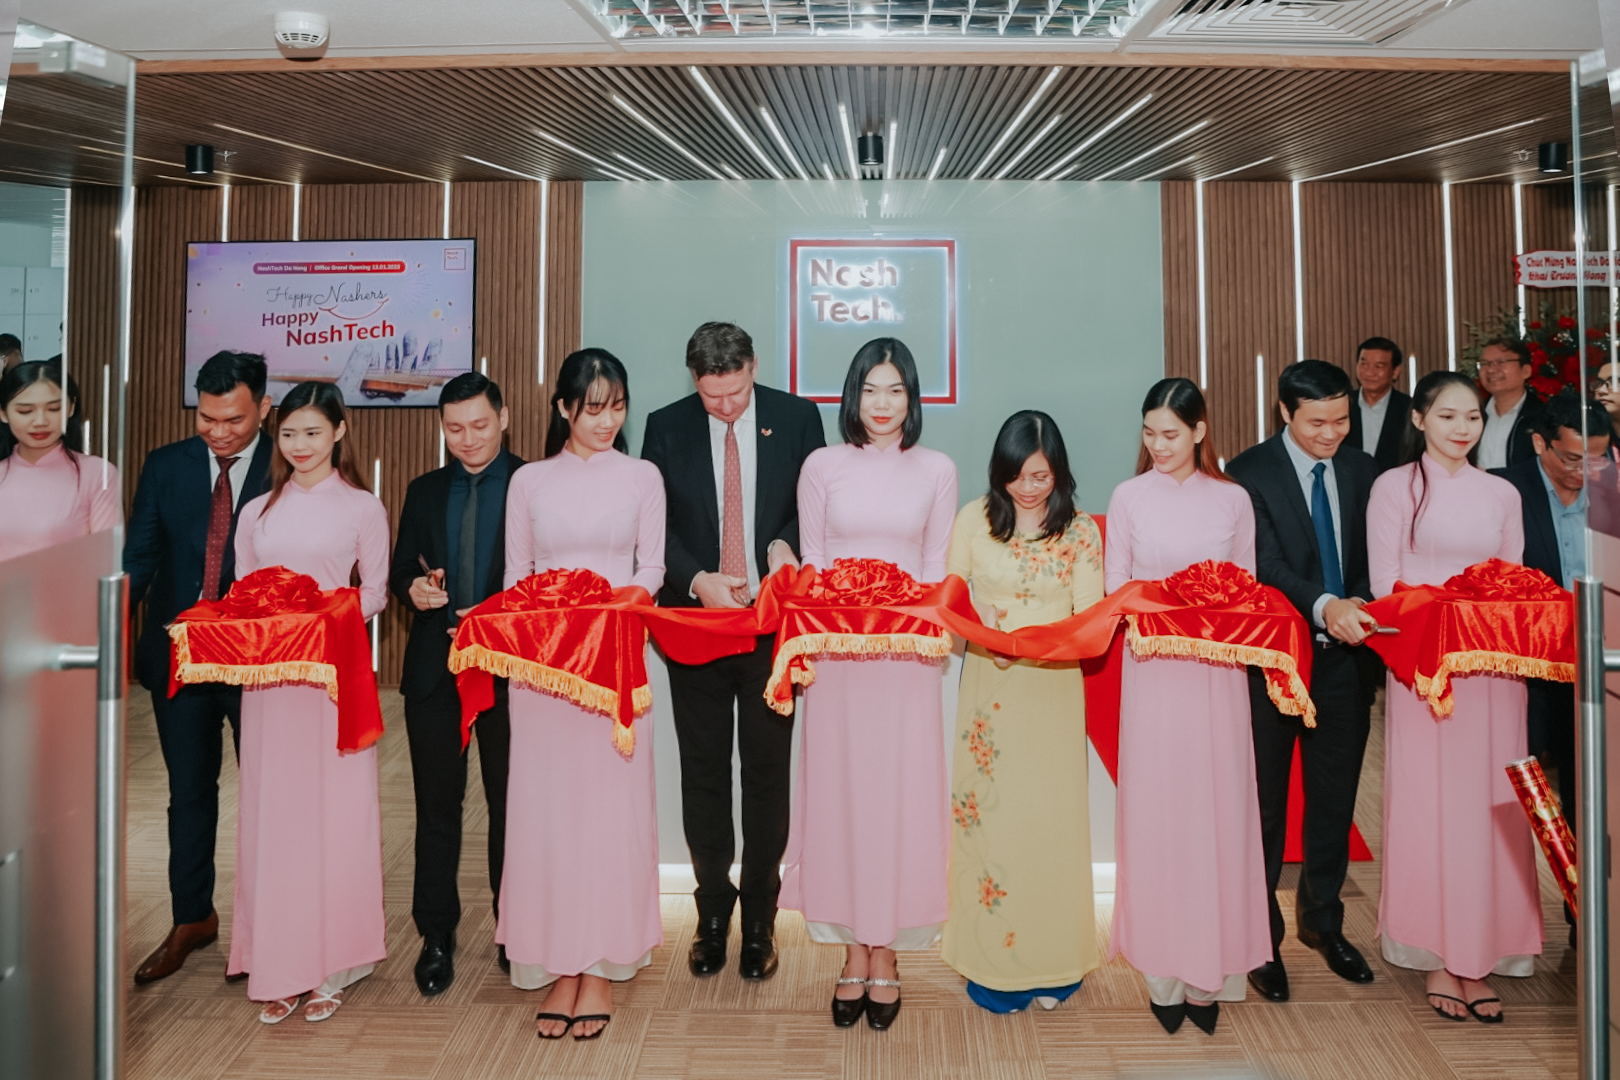 The board of directors at the grand opening of the Da Nang office.